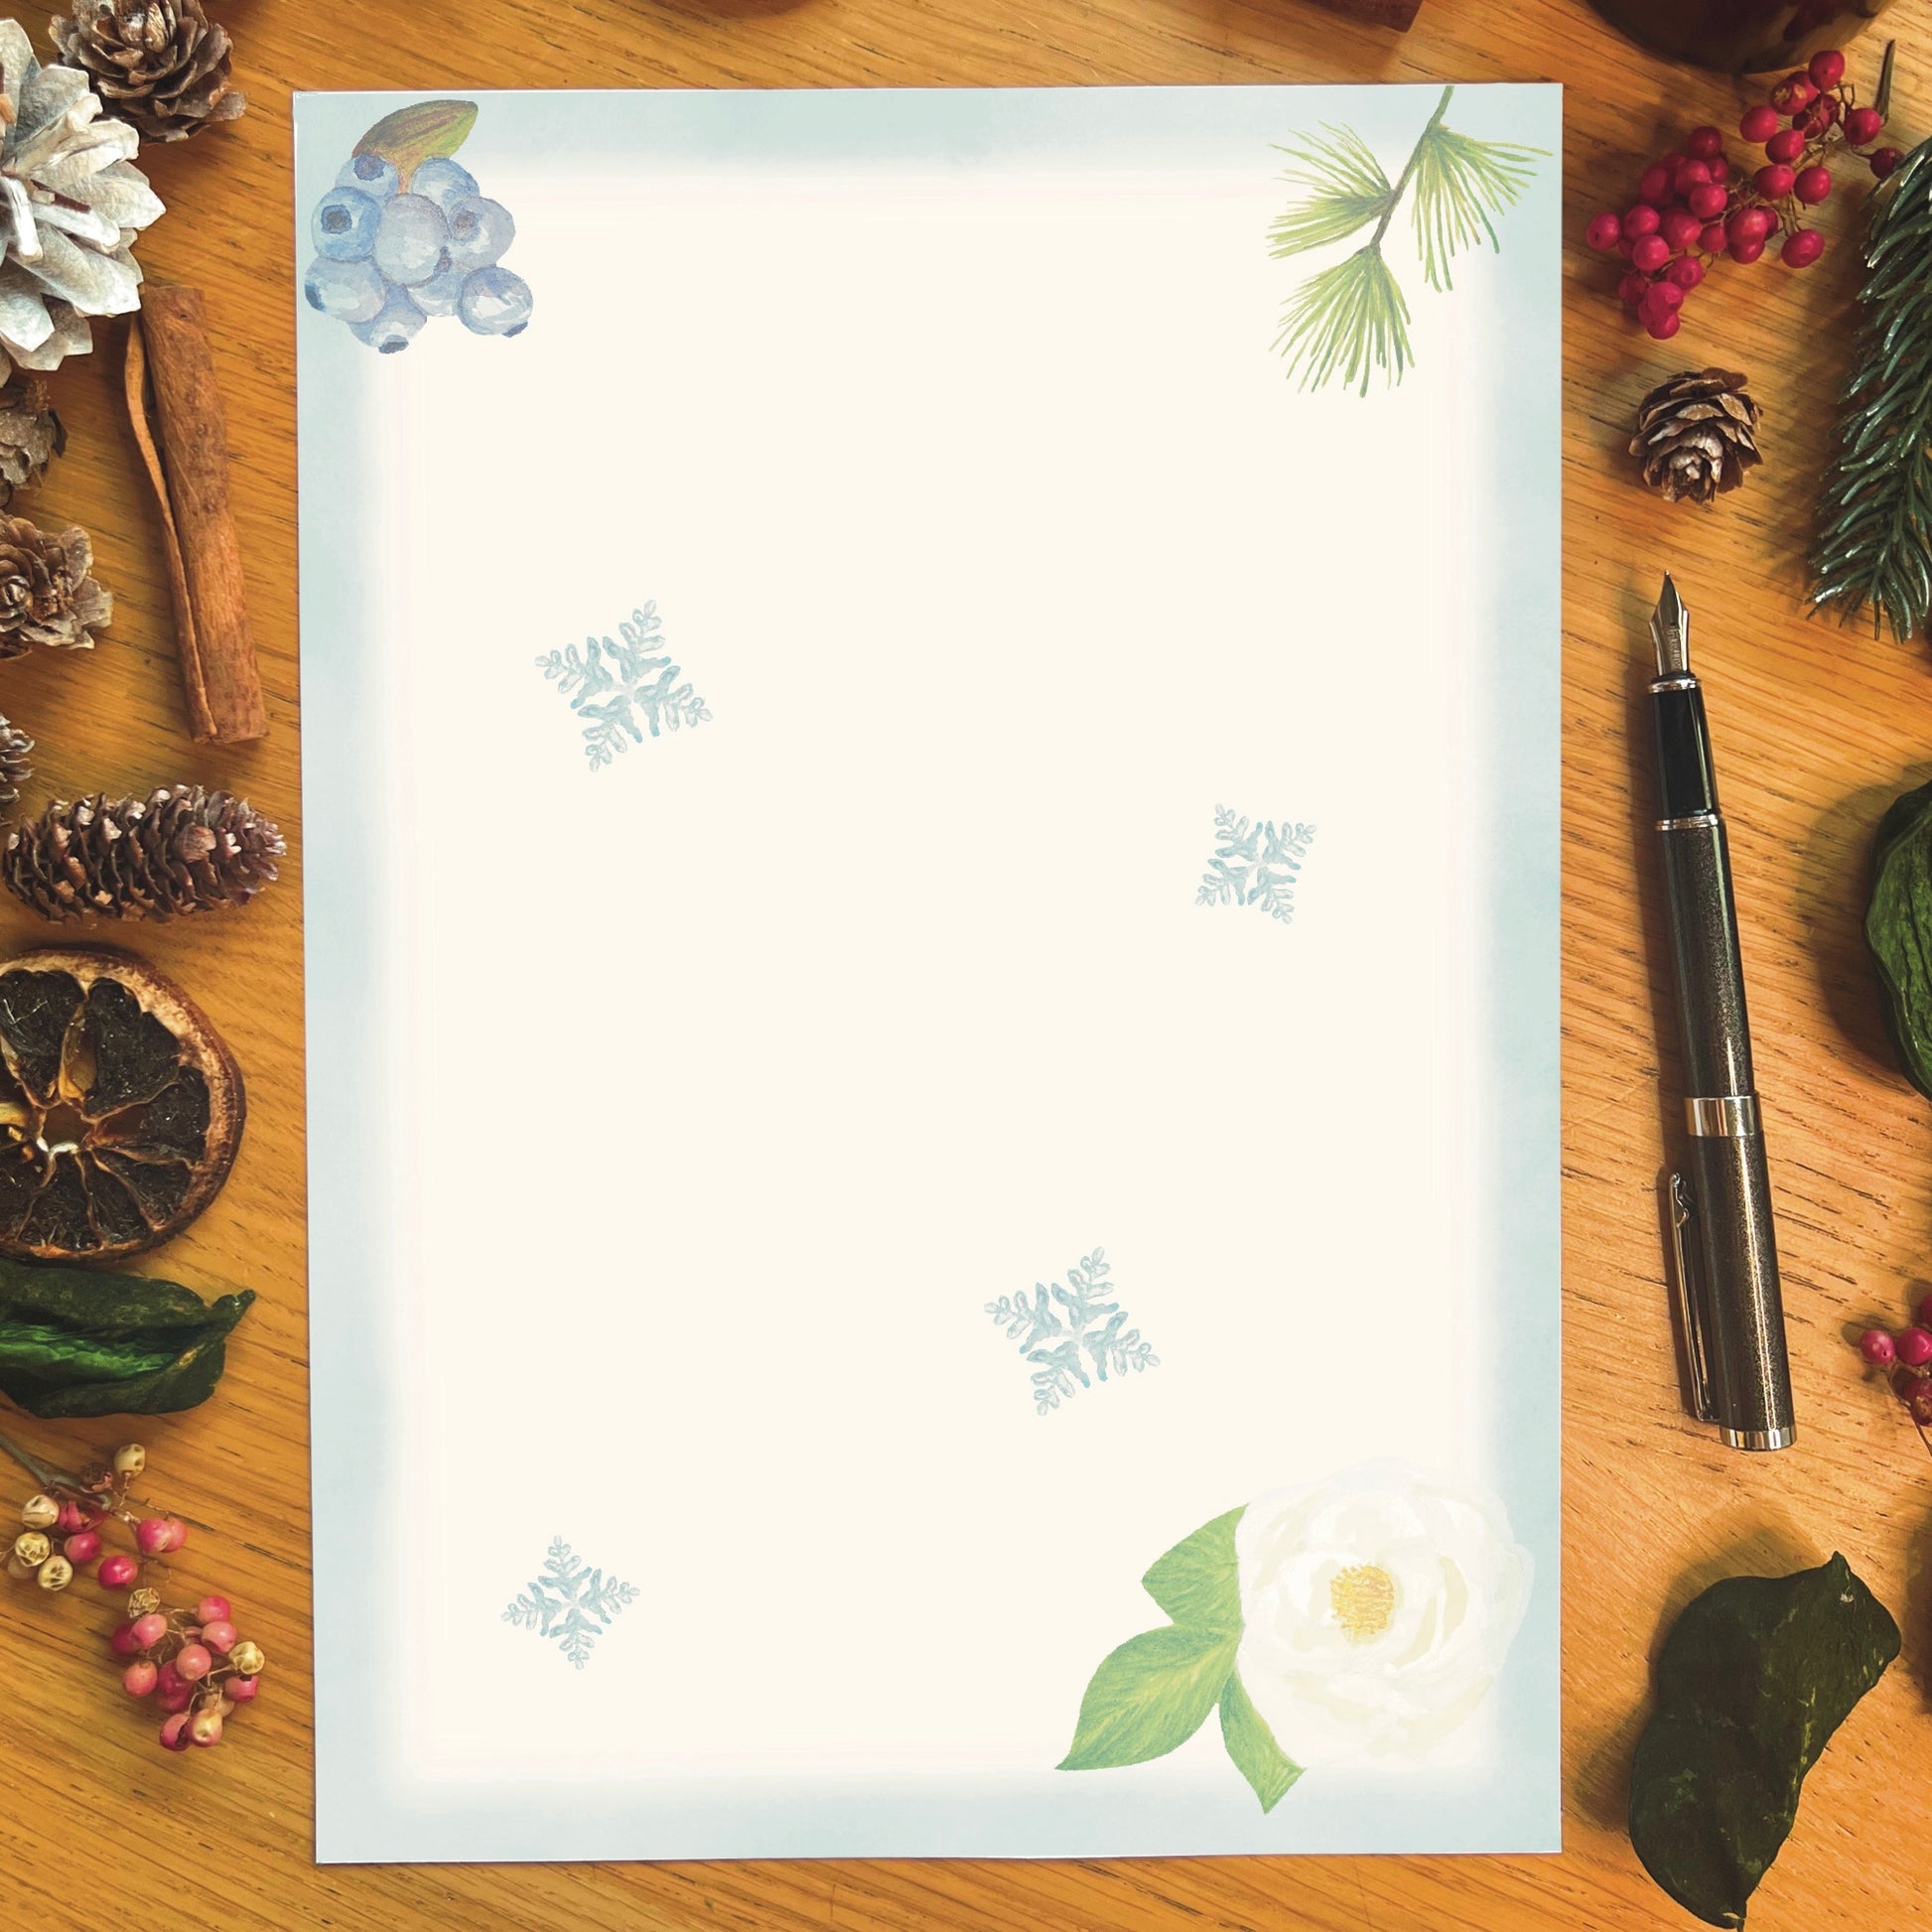 Winter wanderland illustrated paper featuring a white rose with an ice blue border and snowflakes across the page, on a wooden desk